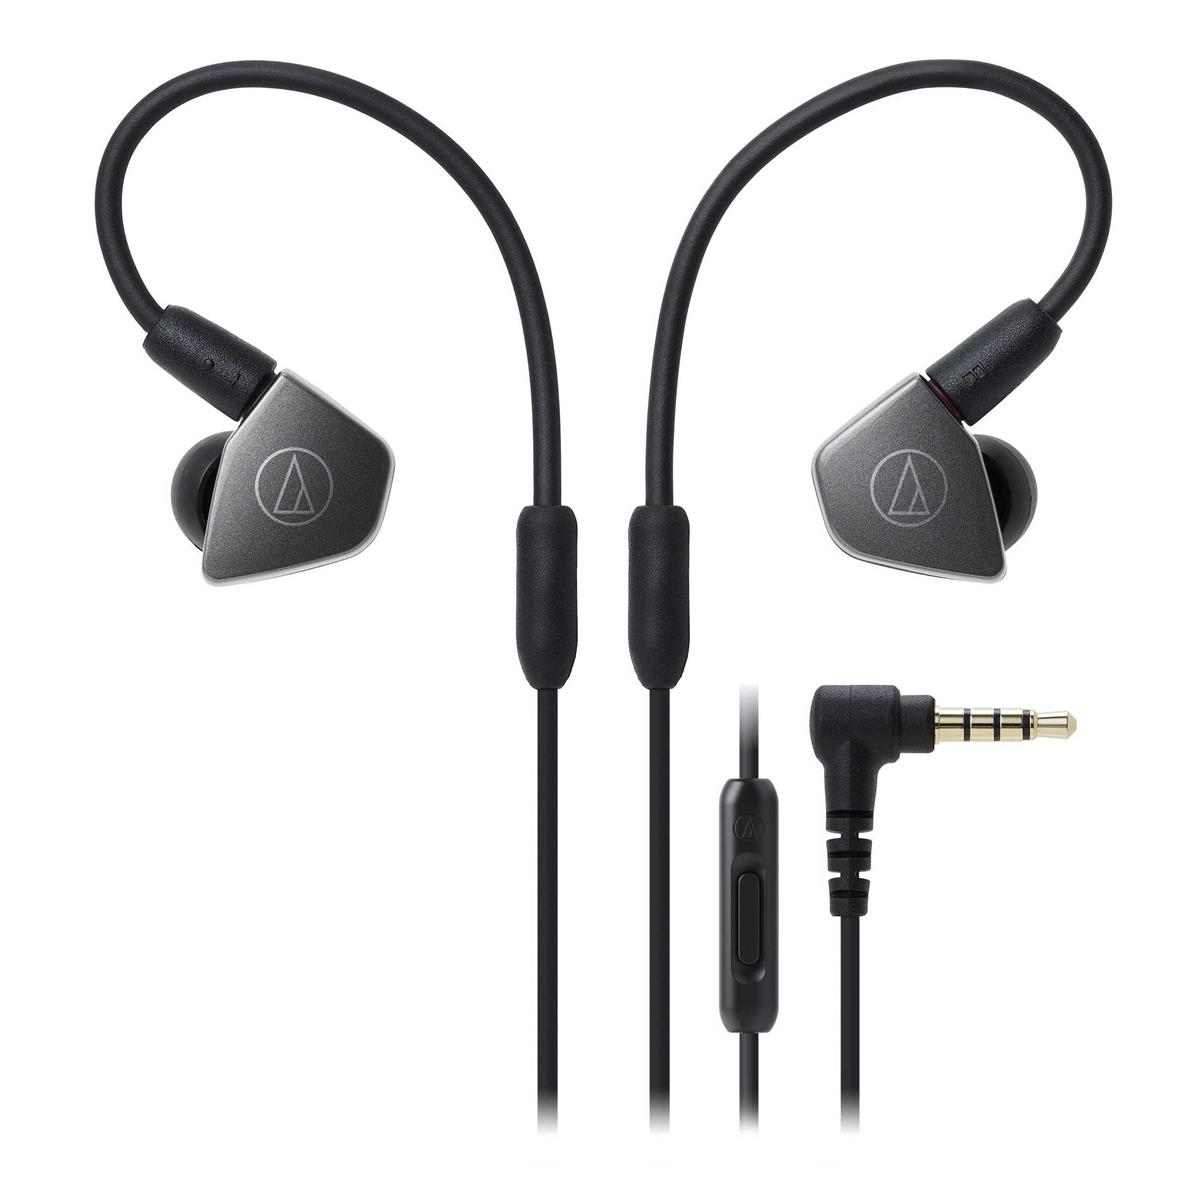 Image of Audio-Technica ATH-LS70iS In-Ear Headphones with In-line Mic and Control